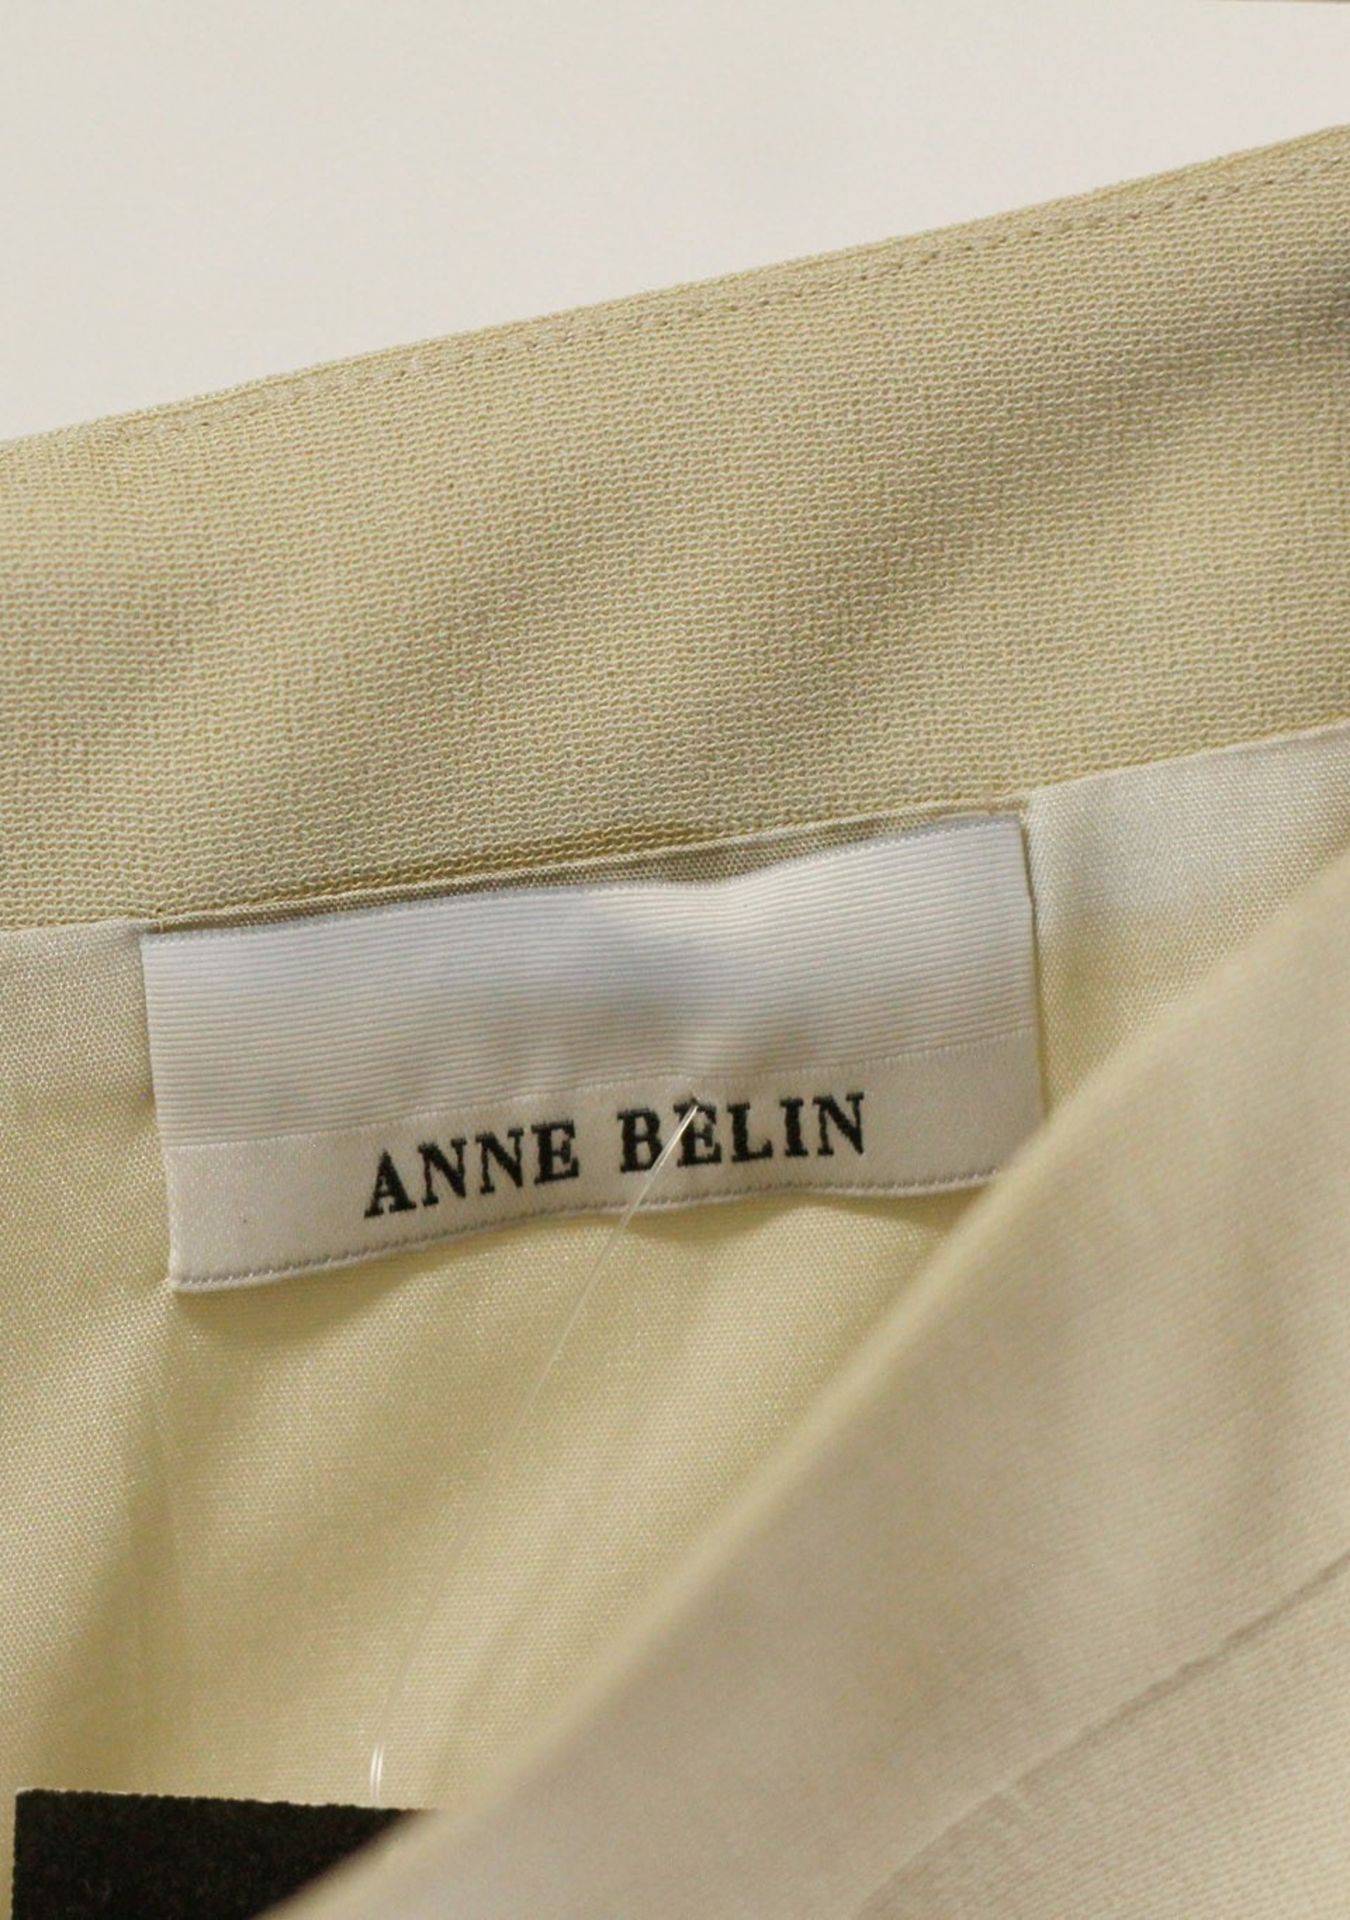 1 x Anne Belin Pistachio Skirt - Size: 16 - Material: 100% Polyester - From a High End Clothing - Image 6 of 11